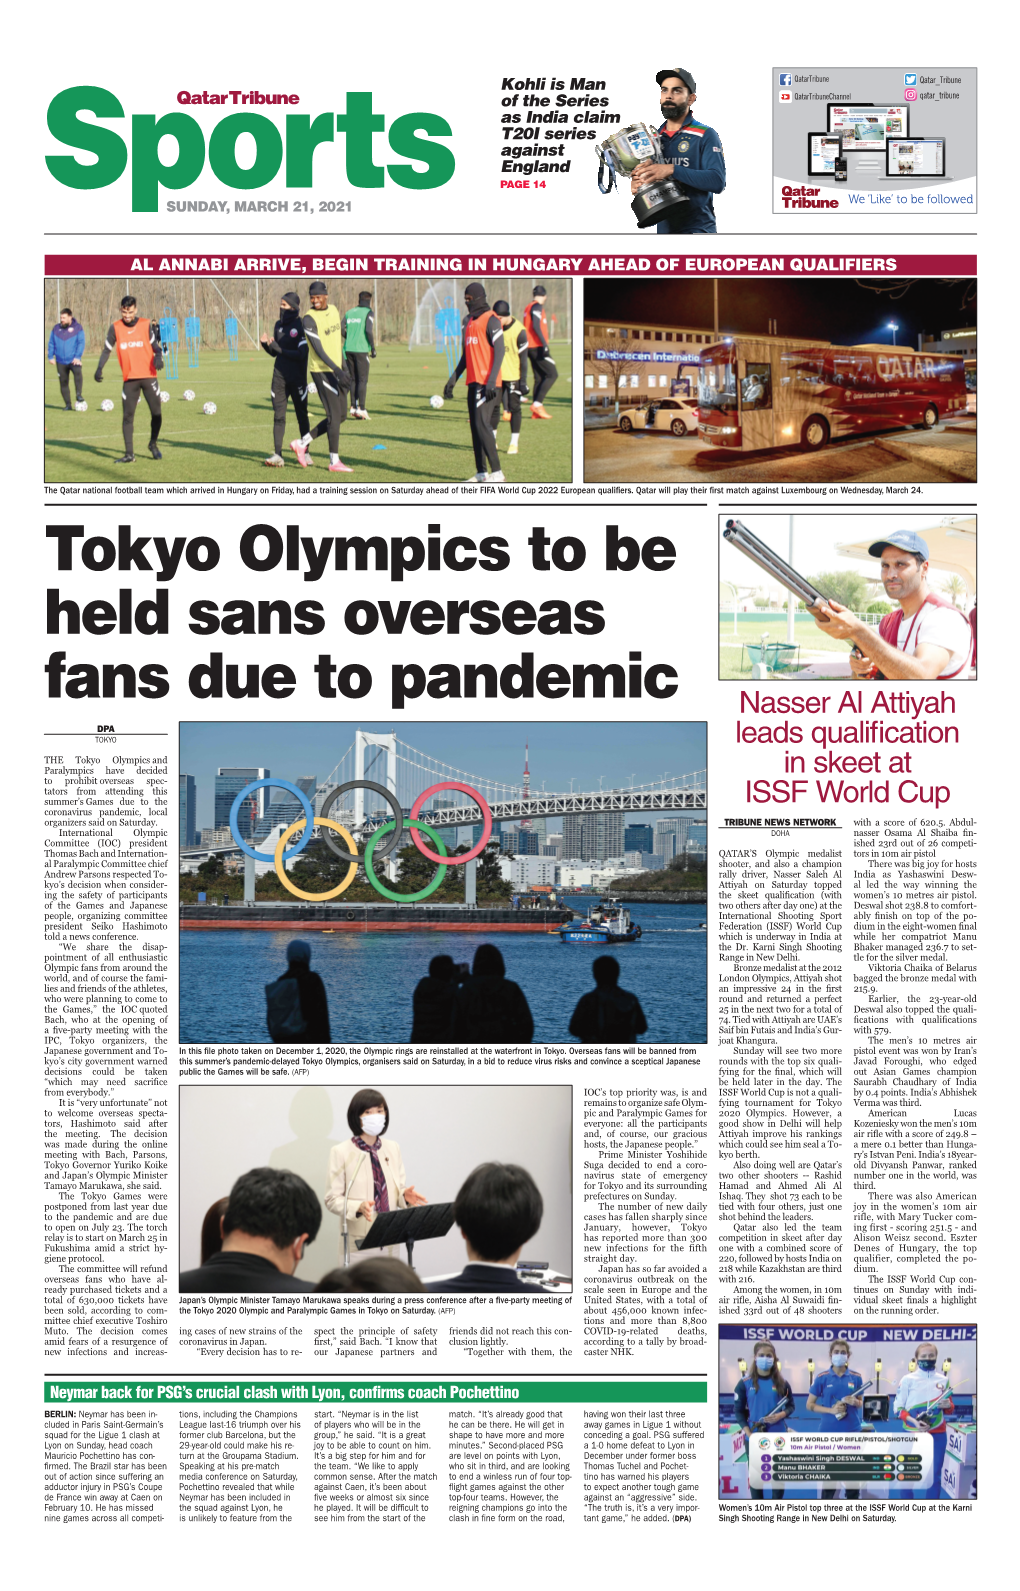 Tokyo Olympics to Be Held Sans Overseas Fans Due to Pandemic